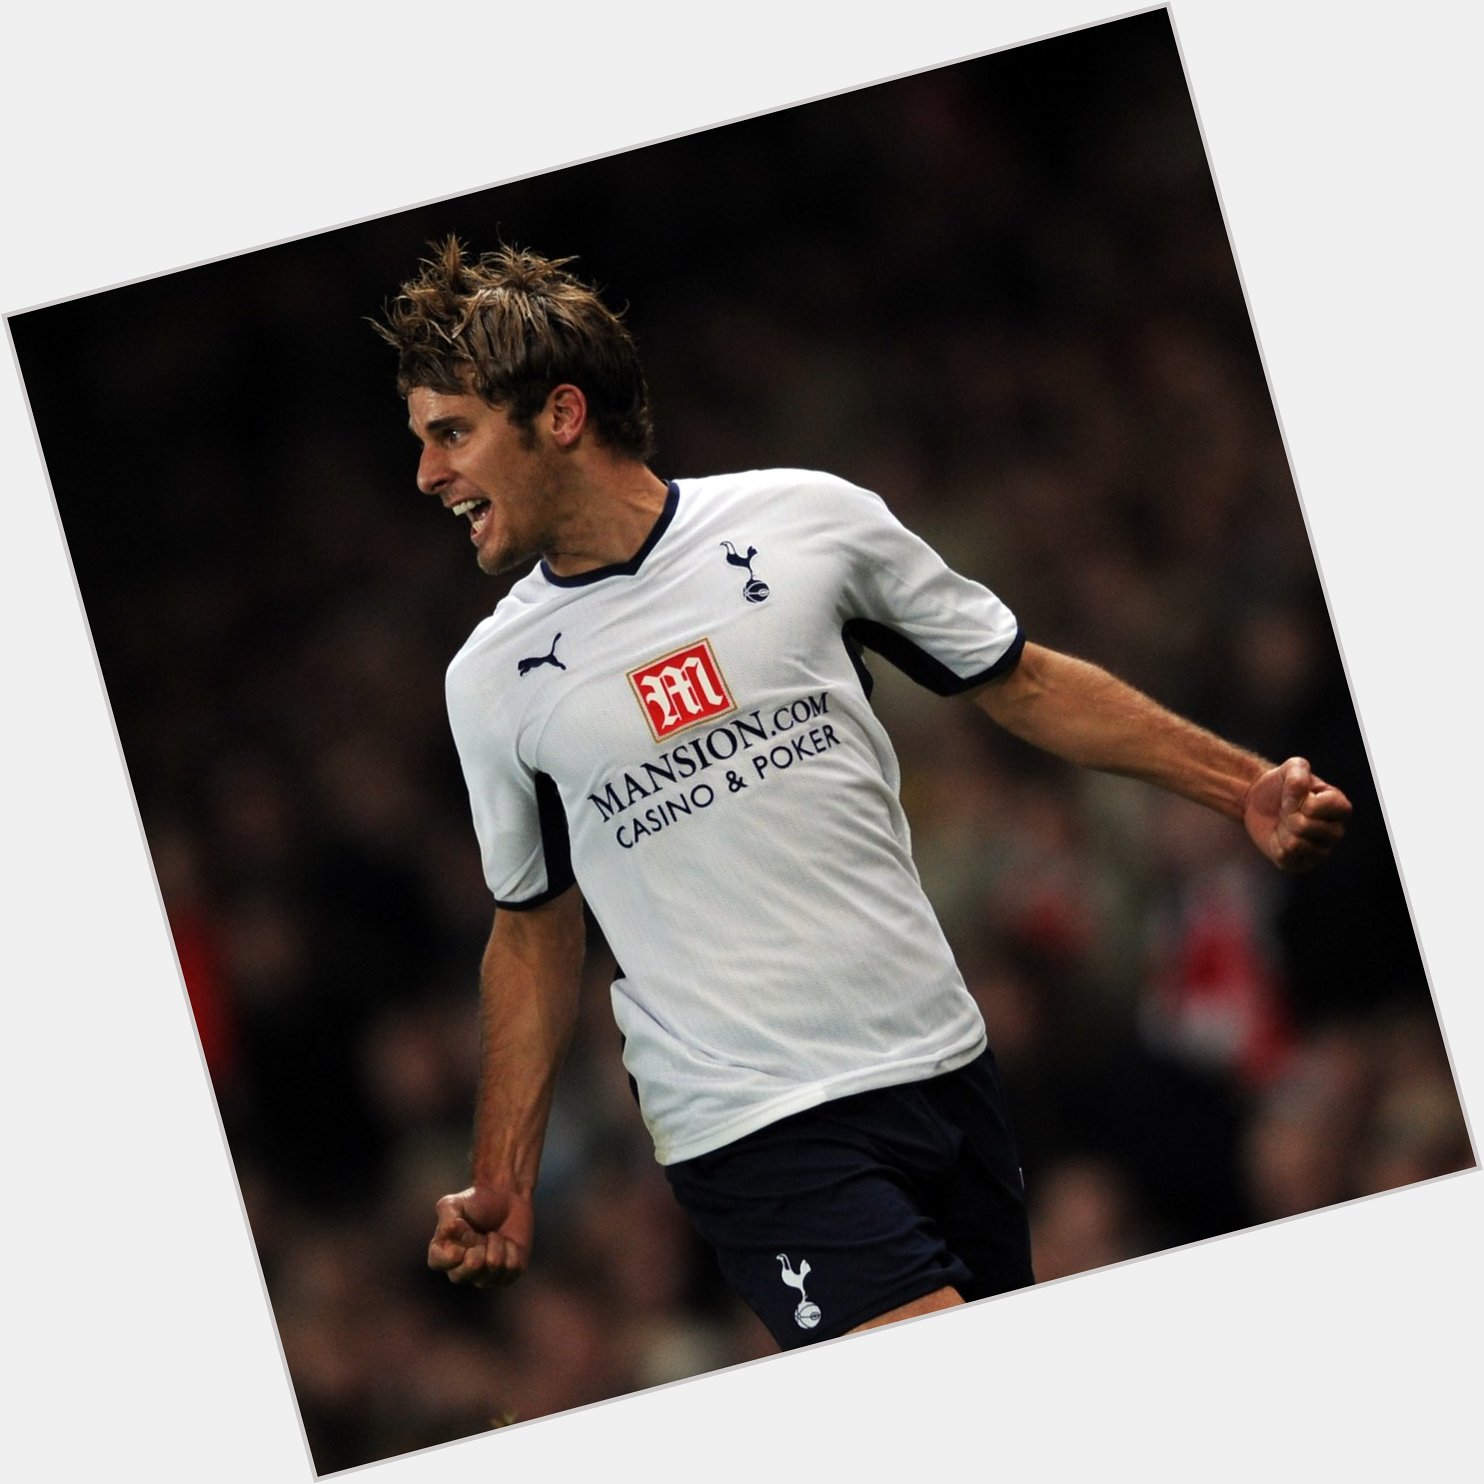   Happy Birthday, David Bentley! 

Would be rude not to show this...  